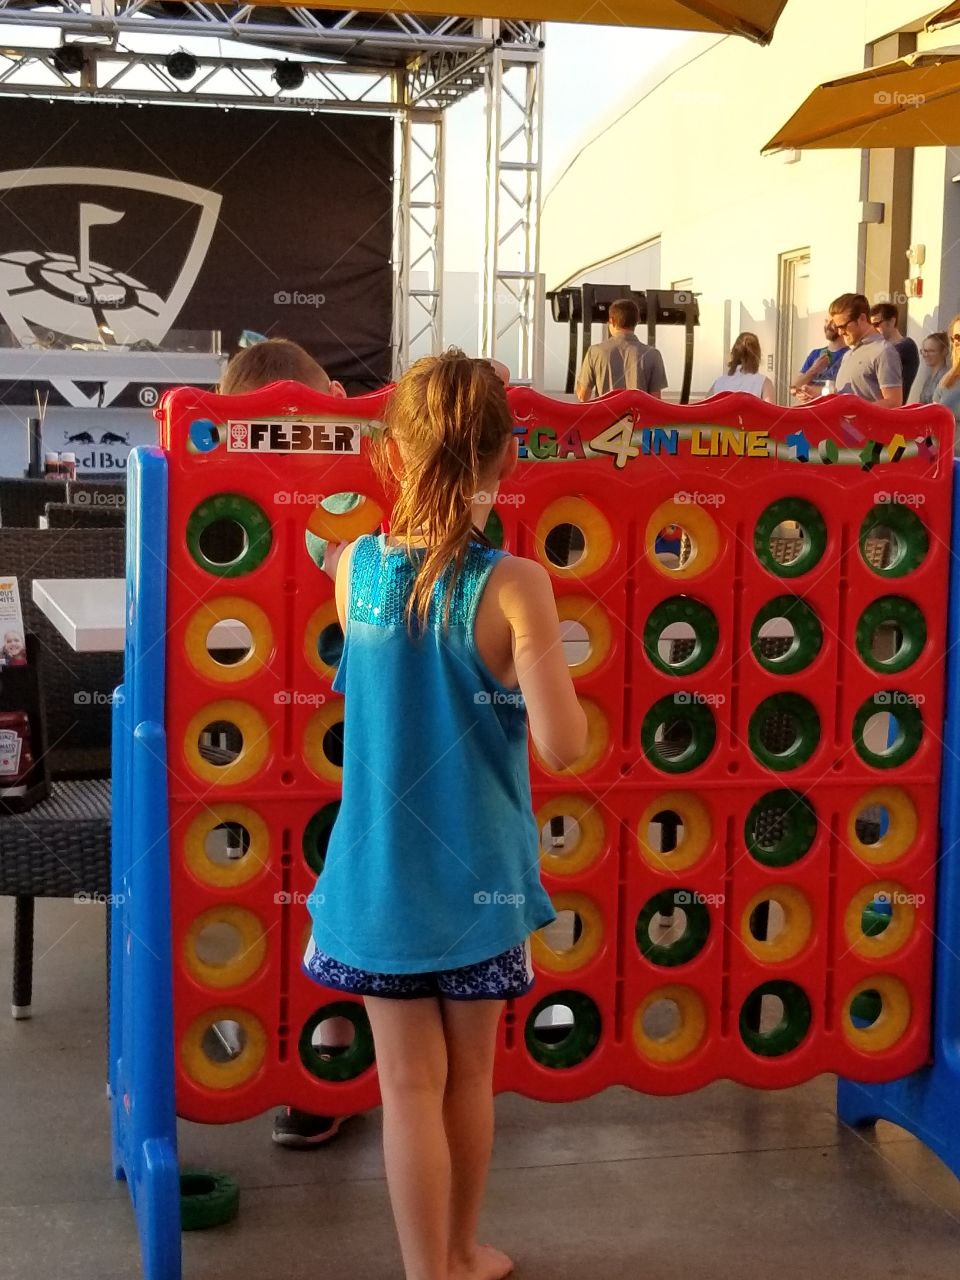 connect 4